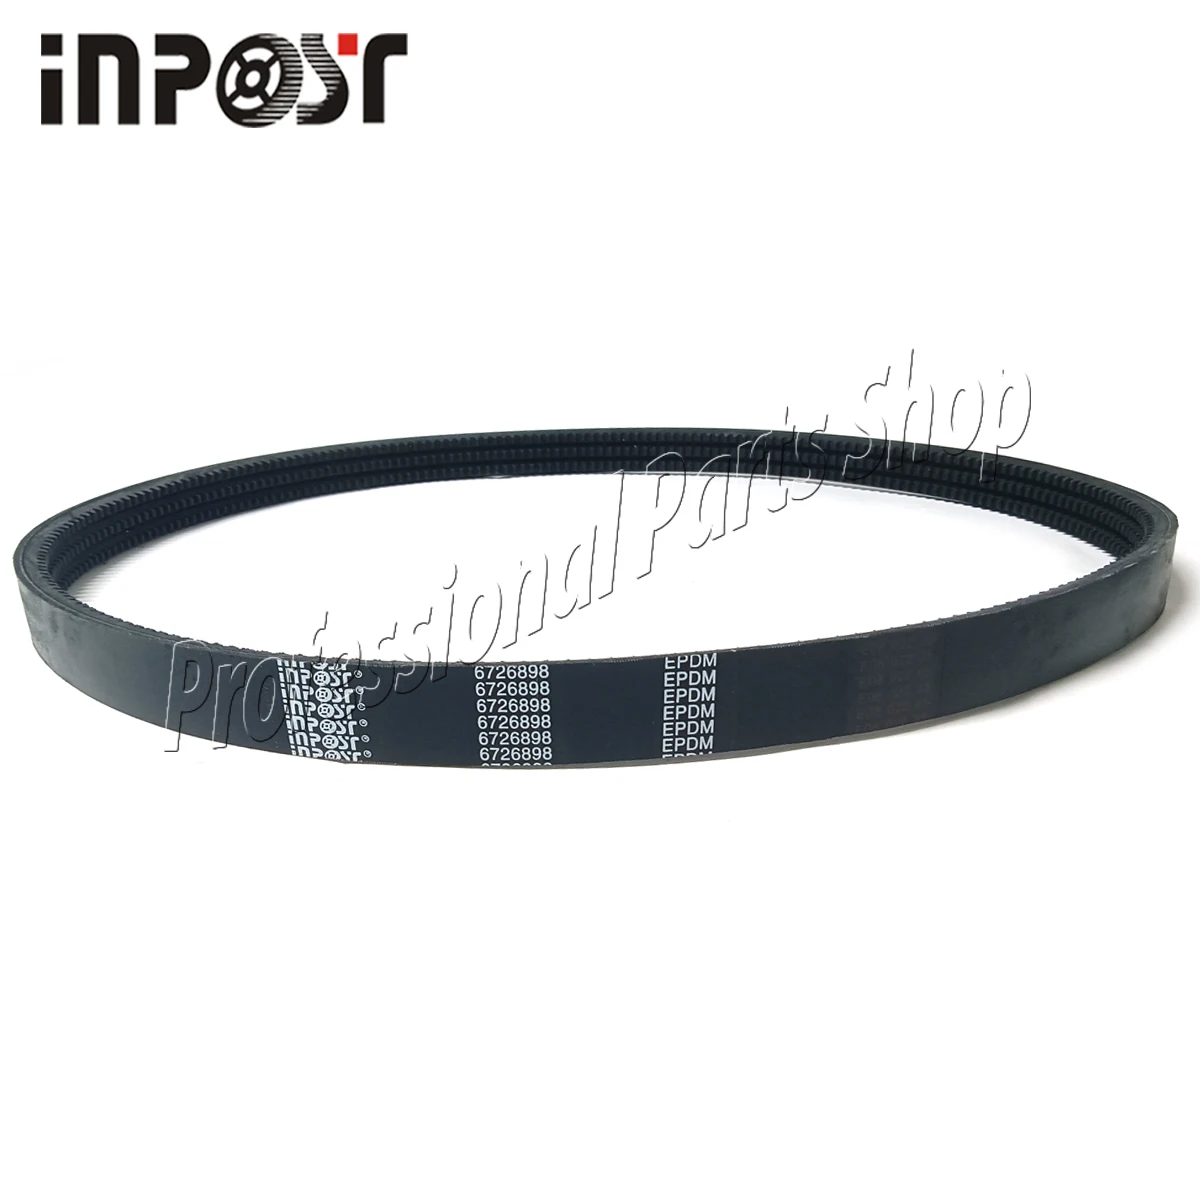 

6726898 Drive Pump Belt With 3 Groves Compatible For Bobcat Loaders 753 763 773 S130 S150 S160 S175 S185 S205 T140 T180 T190